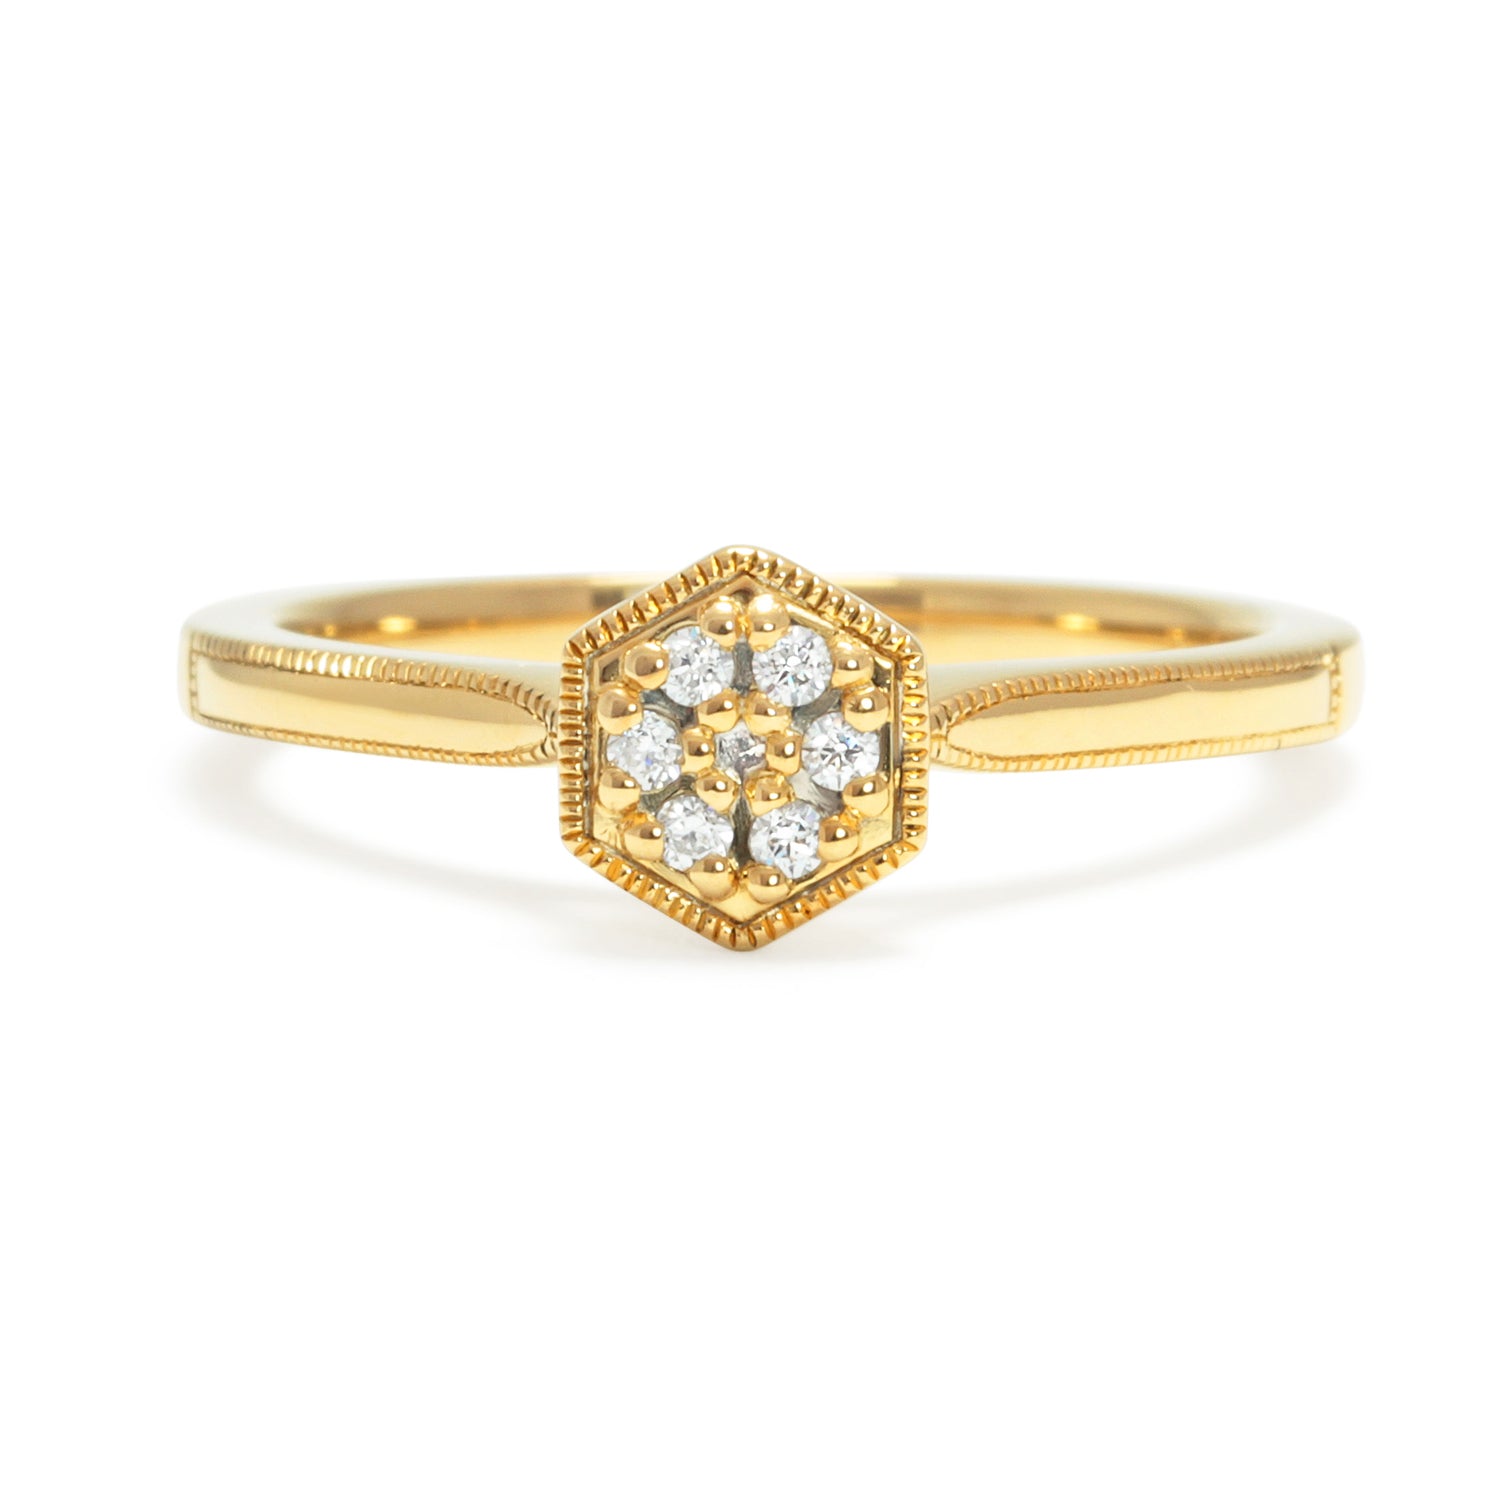 Rose Ethical Diamond Cluster Engagement Ring, traceable and conflict-free Canadian diamonds and recycled 18ct yellow gold